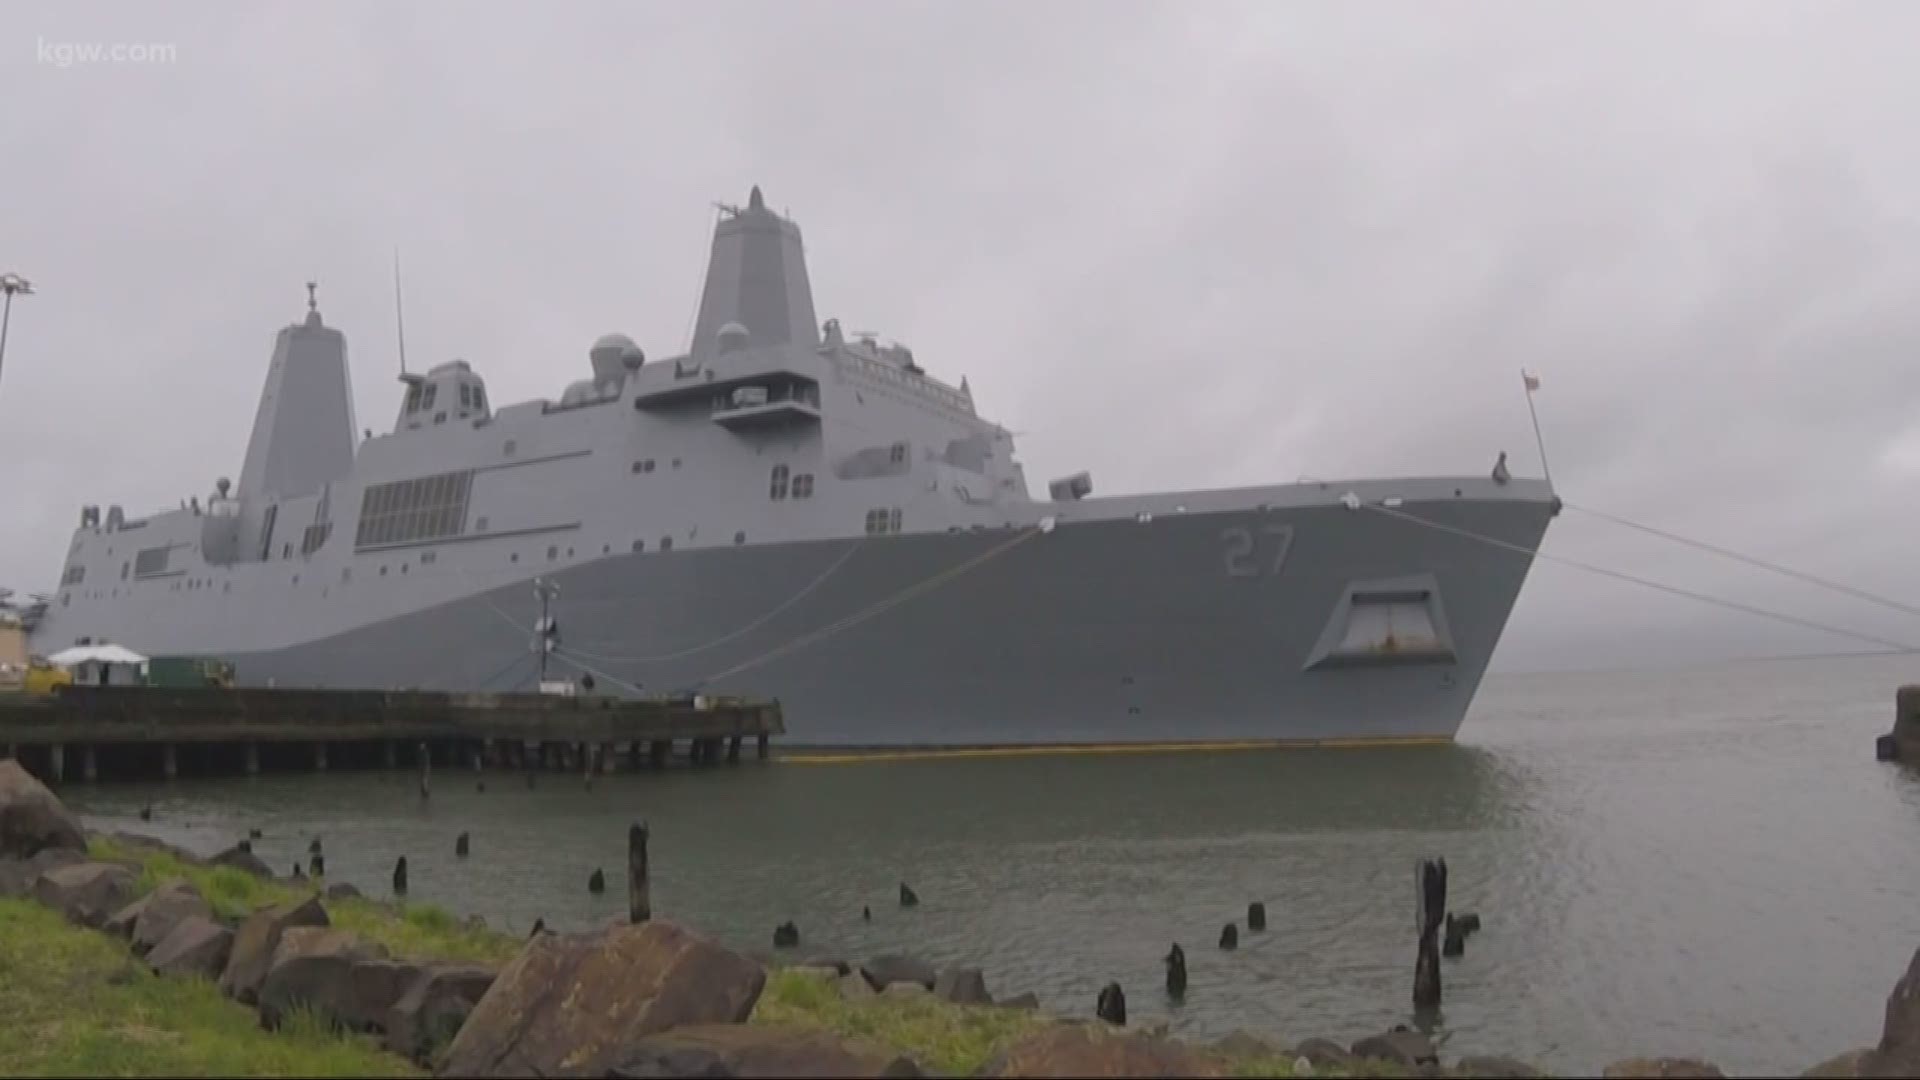 The USS Portland, a new Navy ship that will be commissioned later this month in its namesake city, has entered the Columbia River.